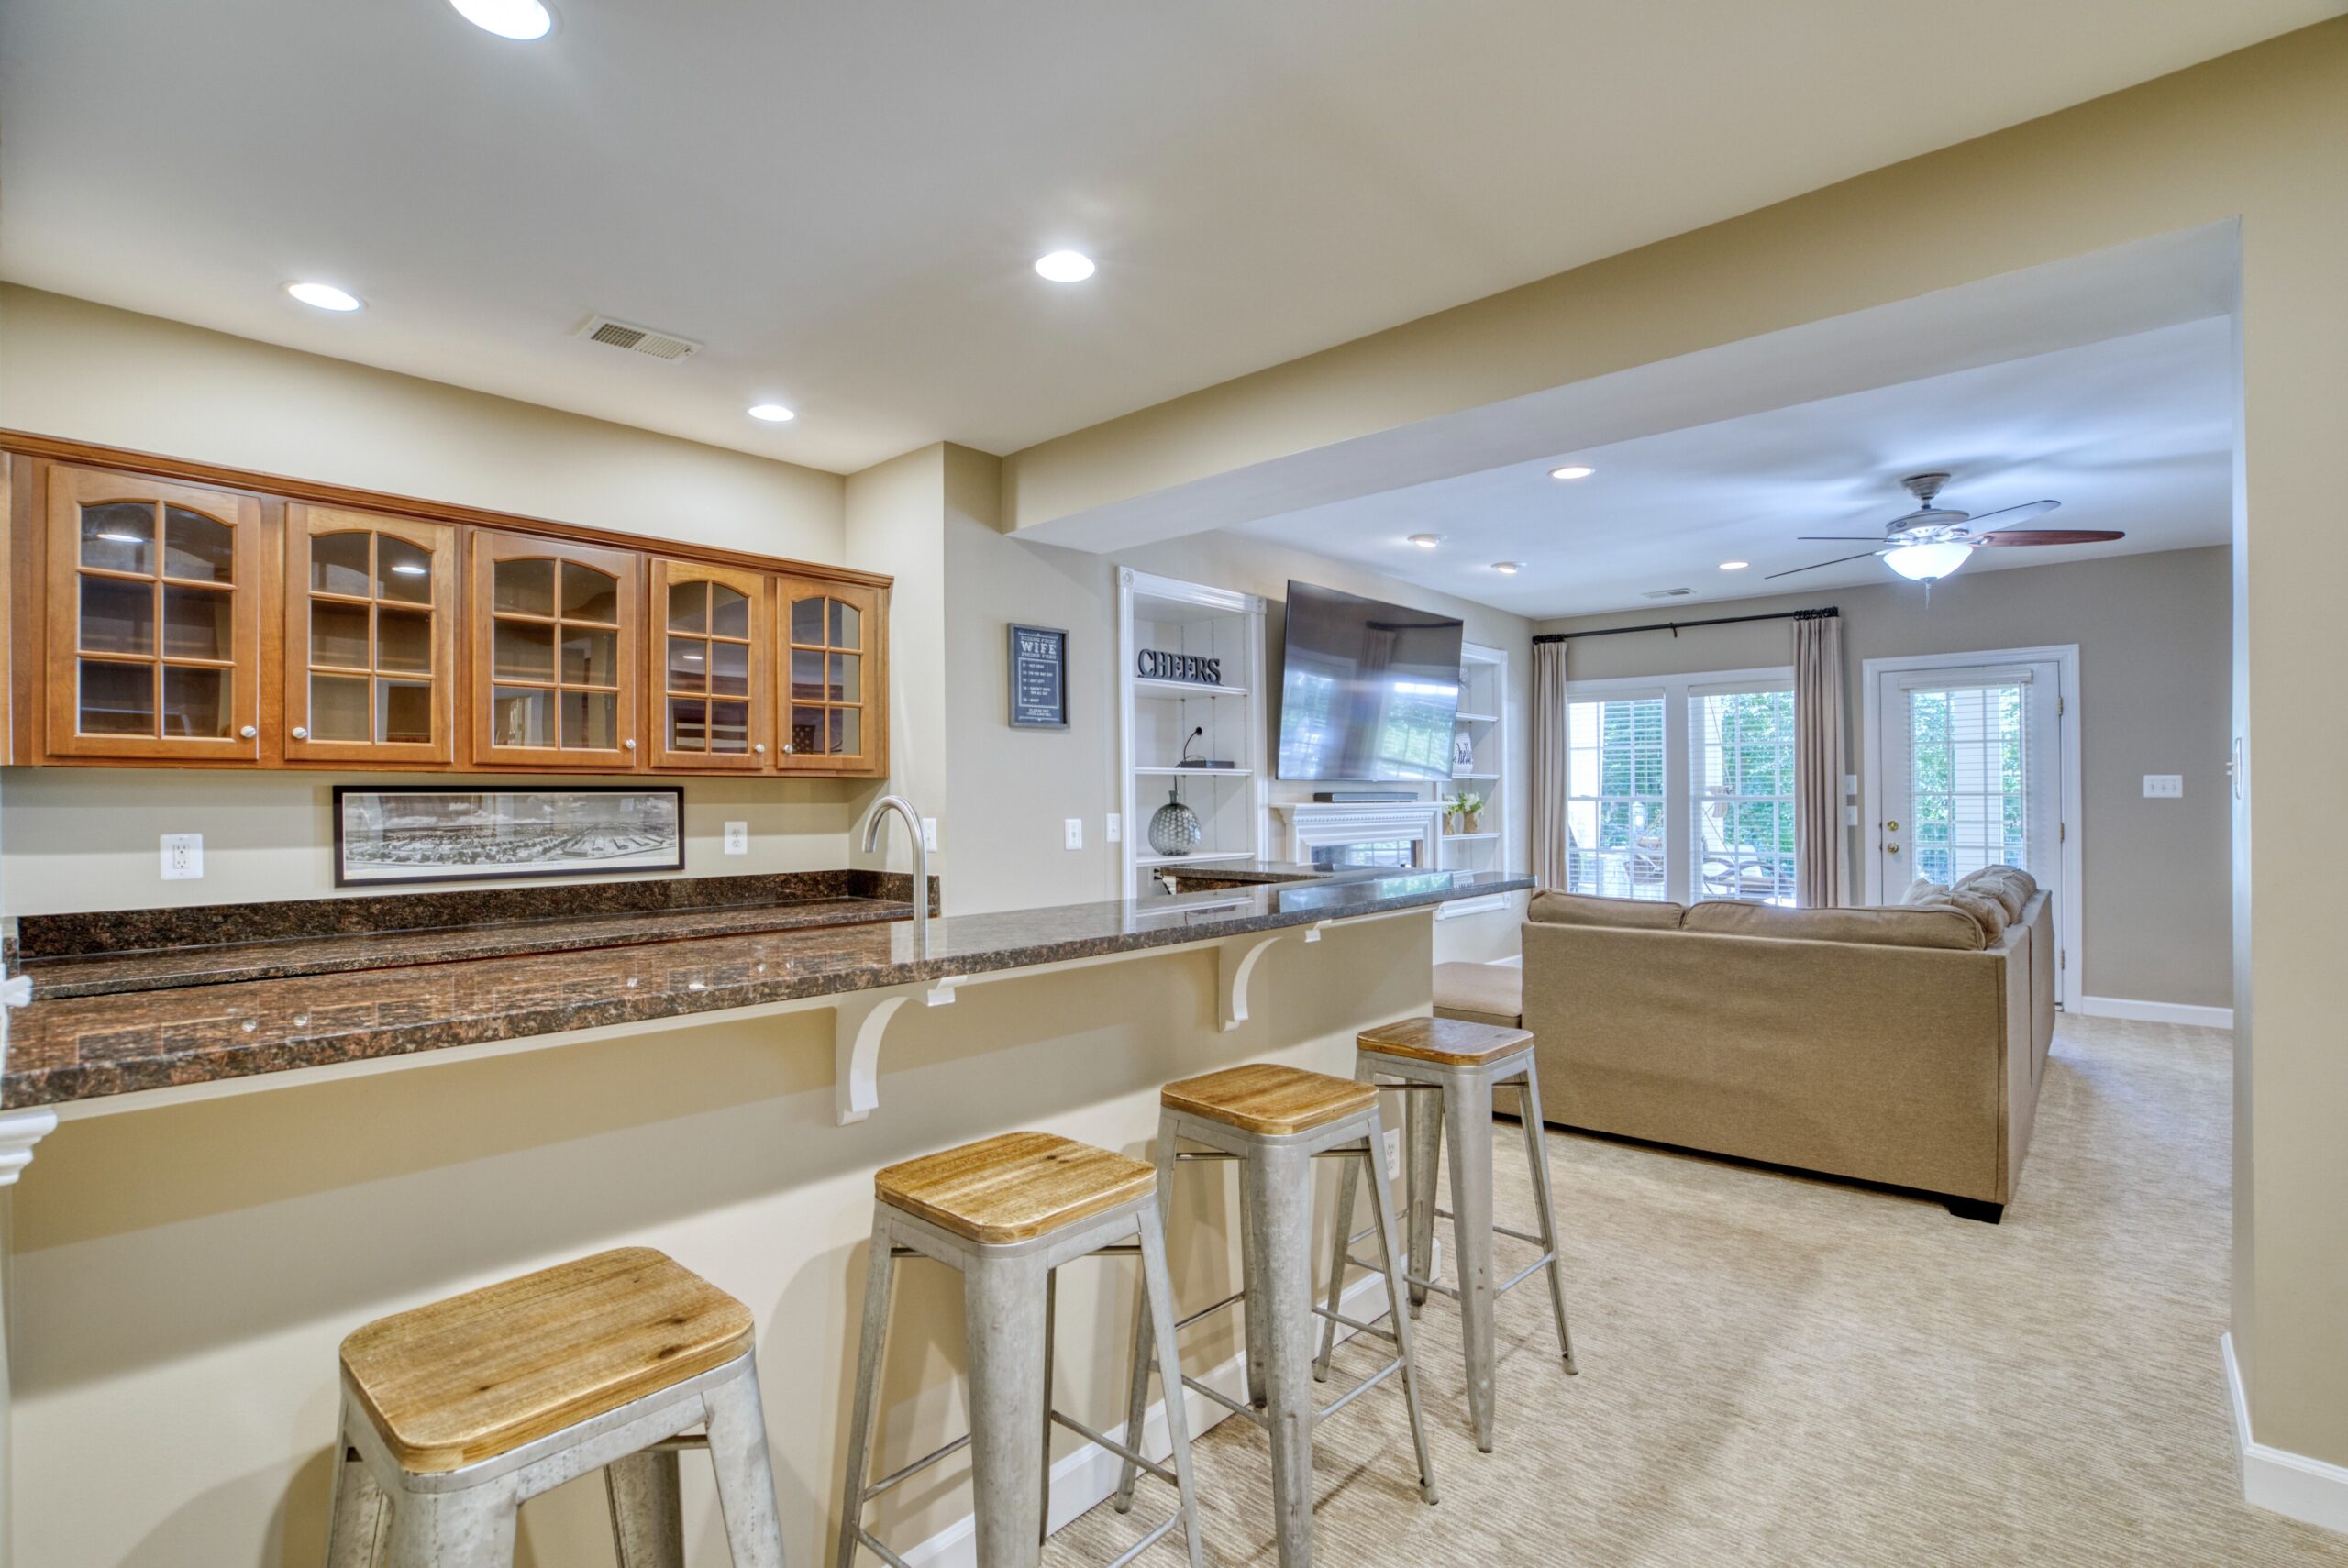 Basement wet bar in 3-story townhome with brown granite countertops and barstools, looking into the living area